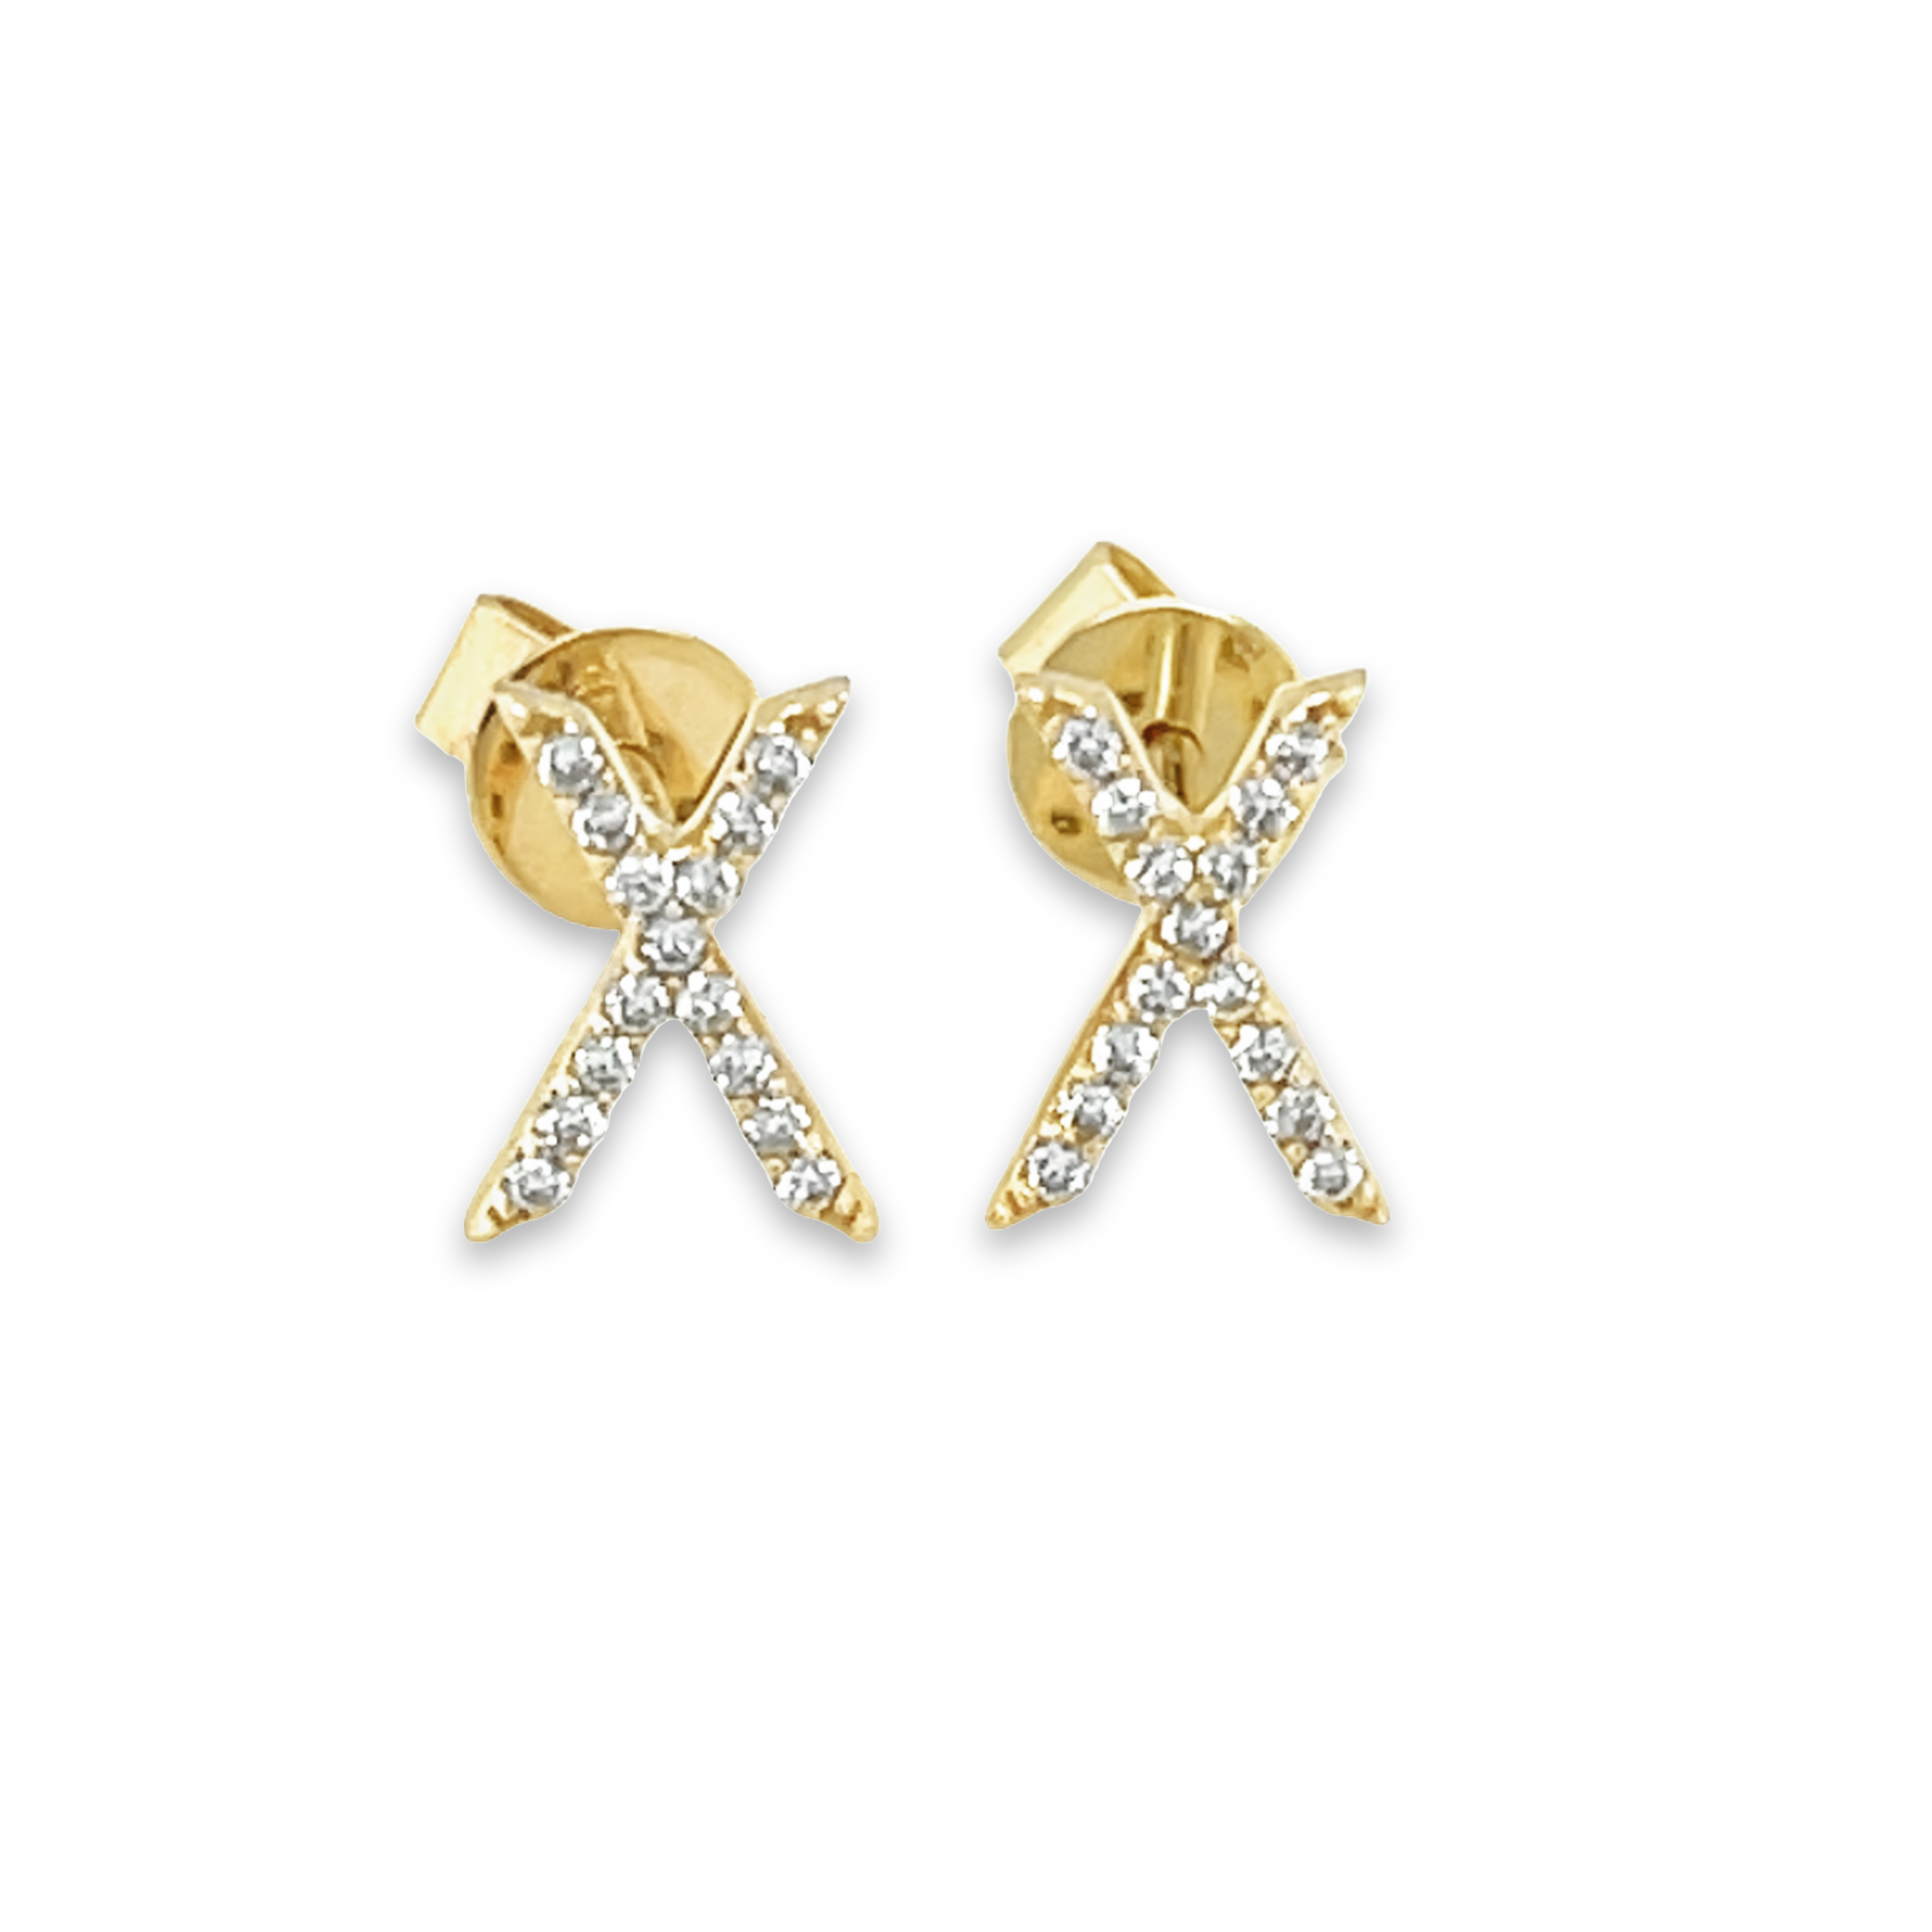 Featured image for “Kiss Earrings”